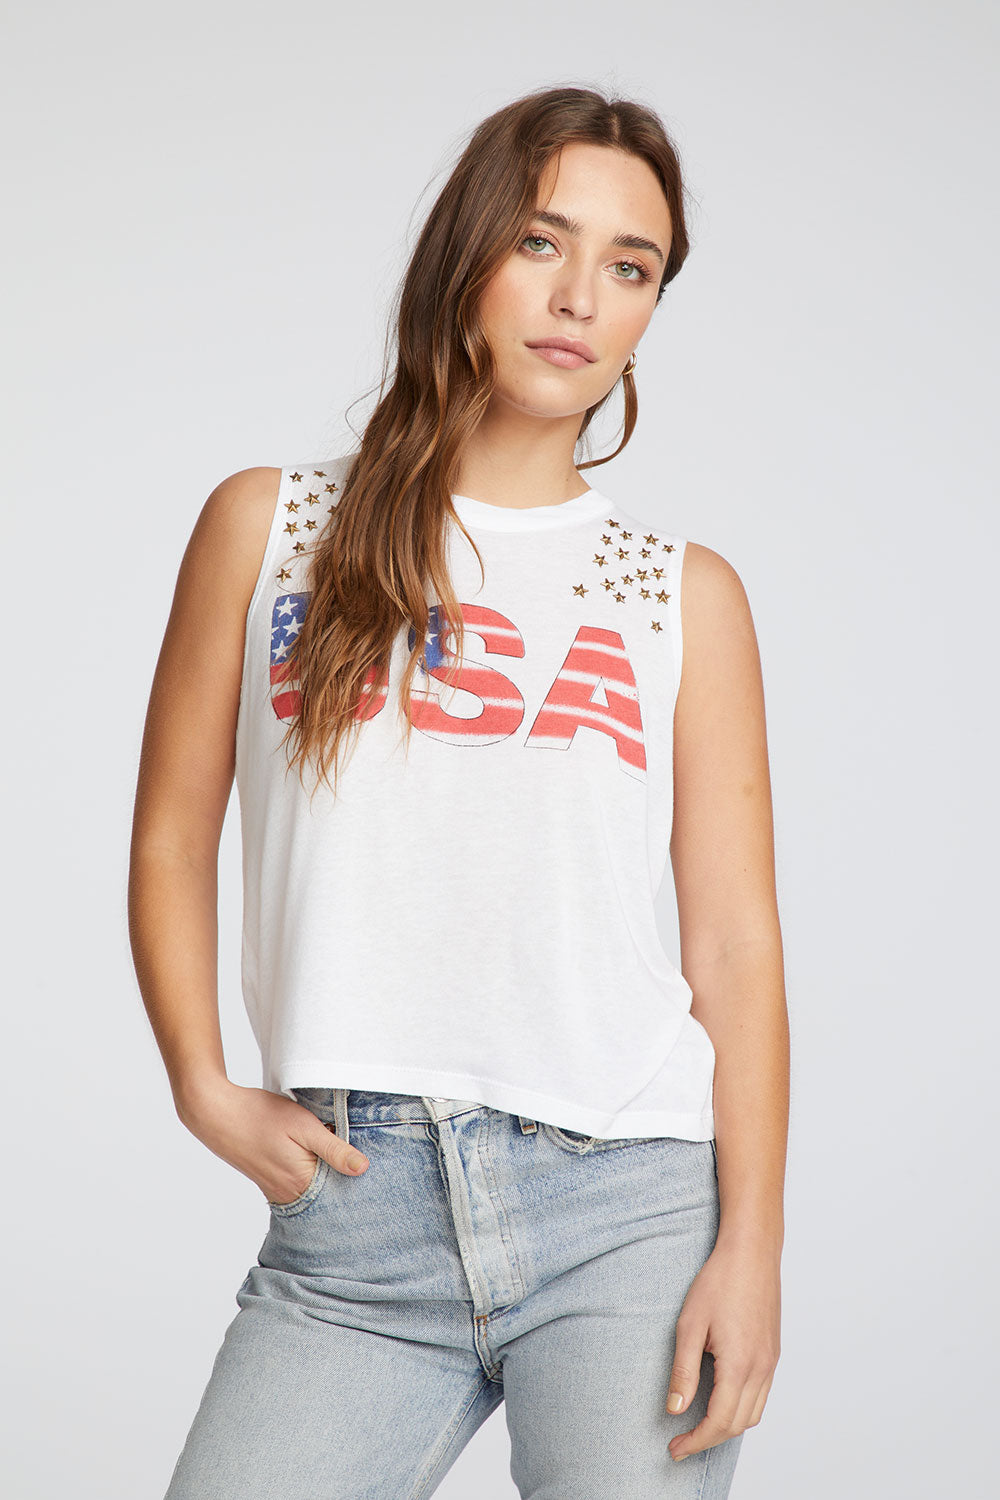 USA Star WOMENS chaserbrand